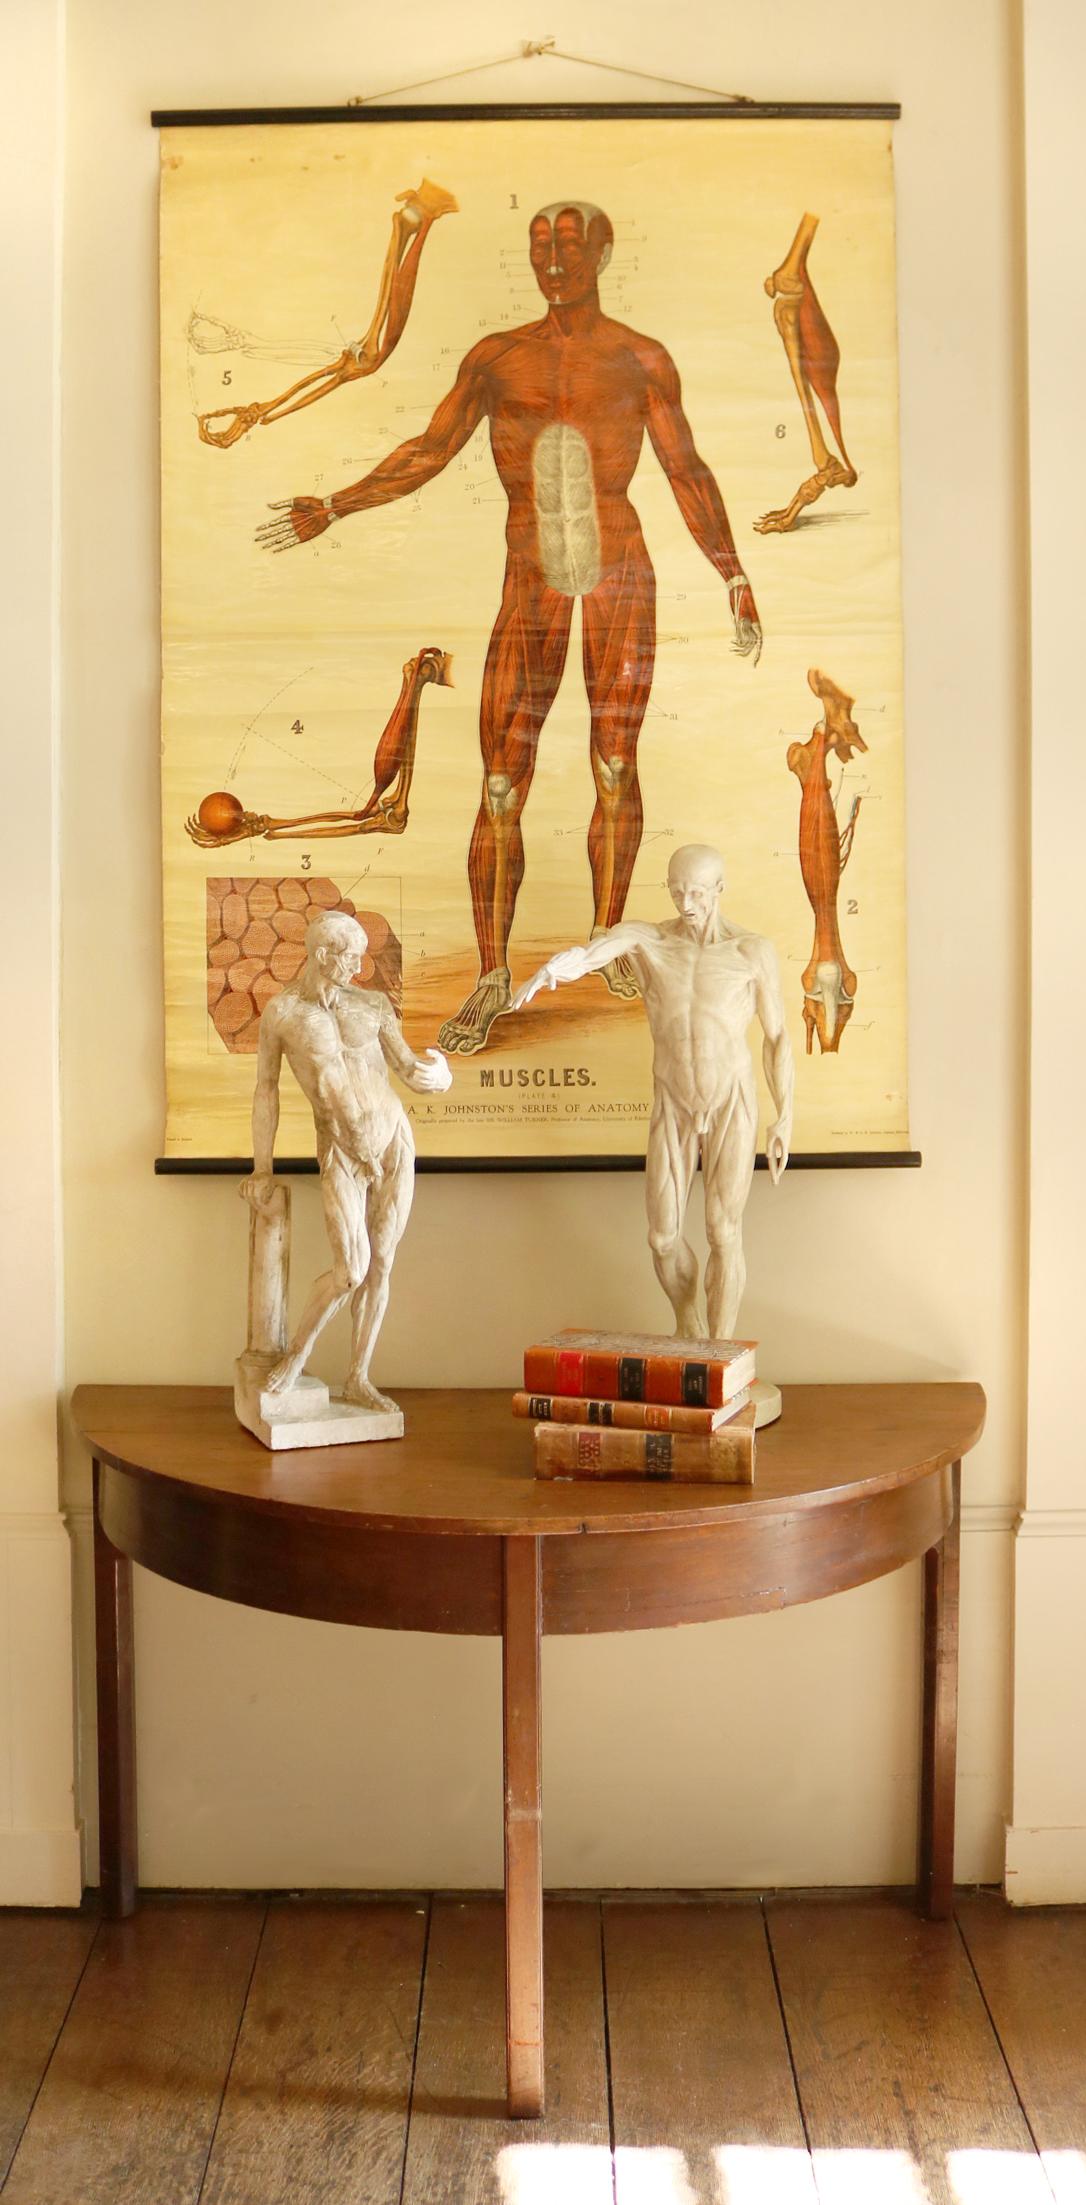 W&a J Johnstons Series of Anatomy, Muscular Framework For Sale 2